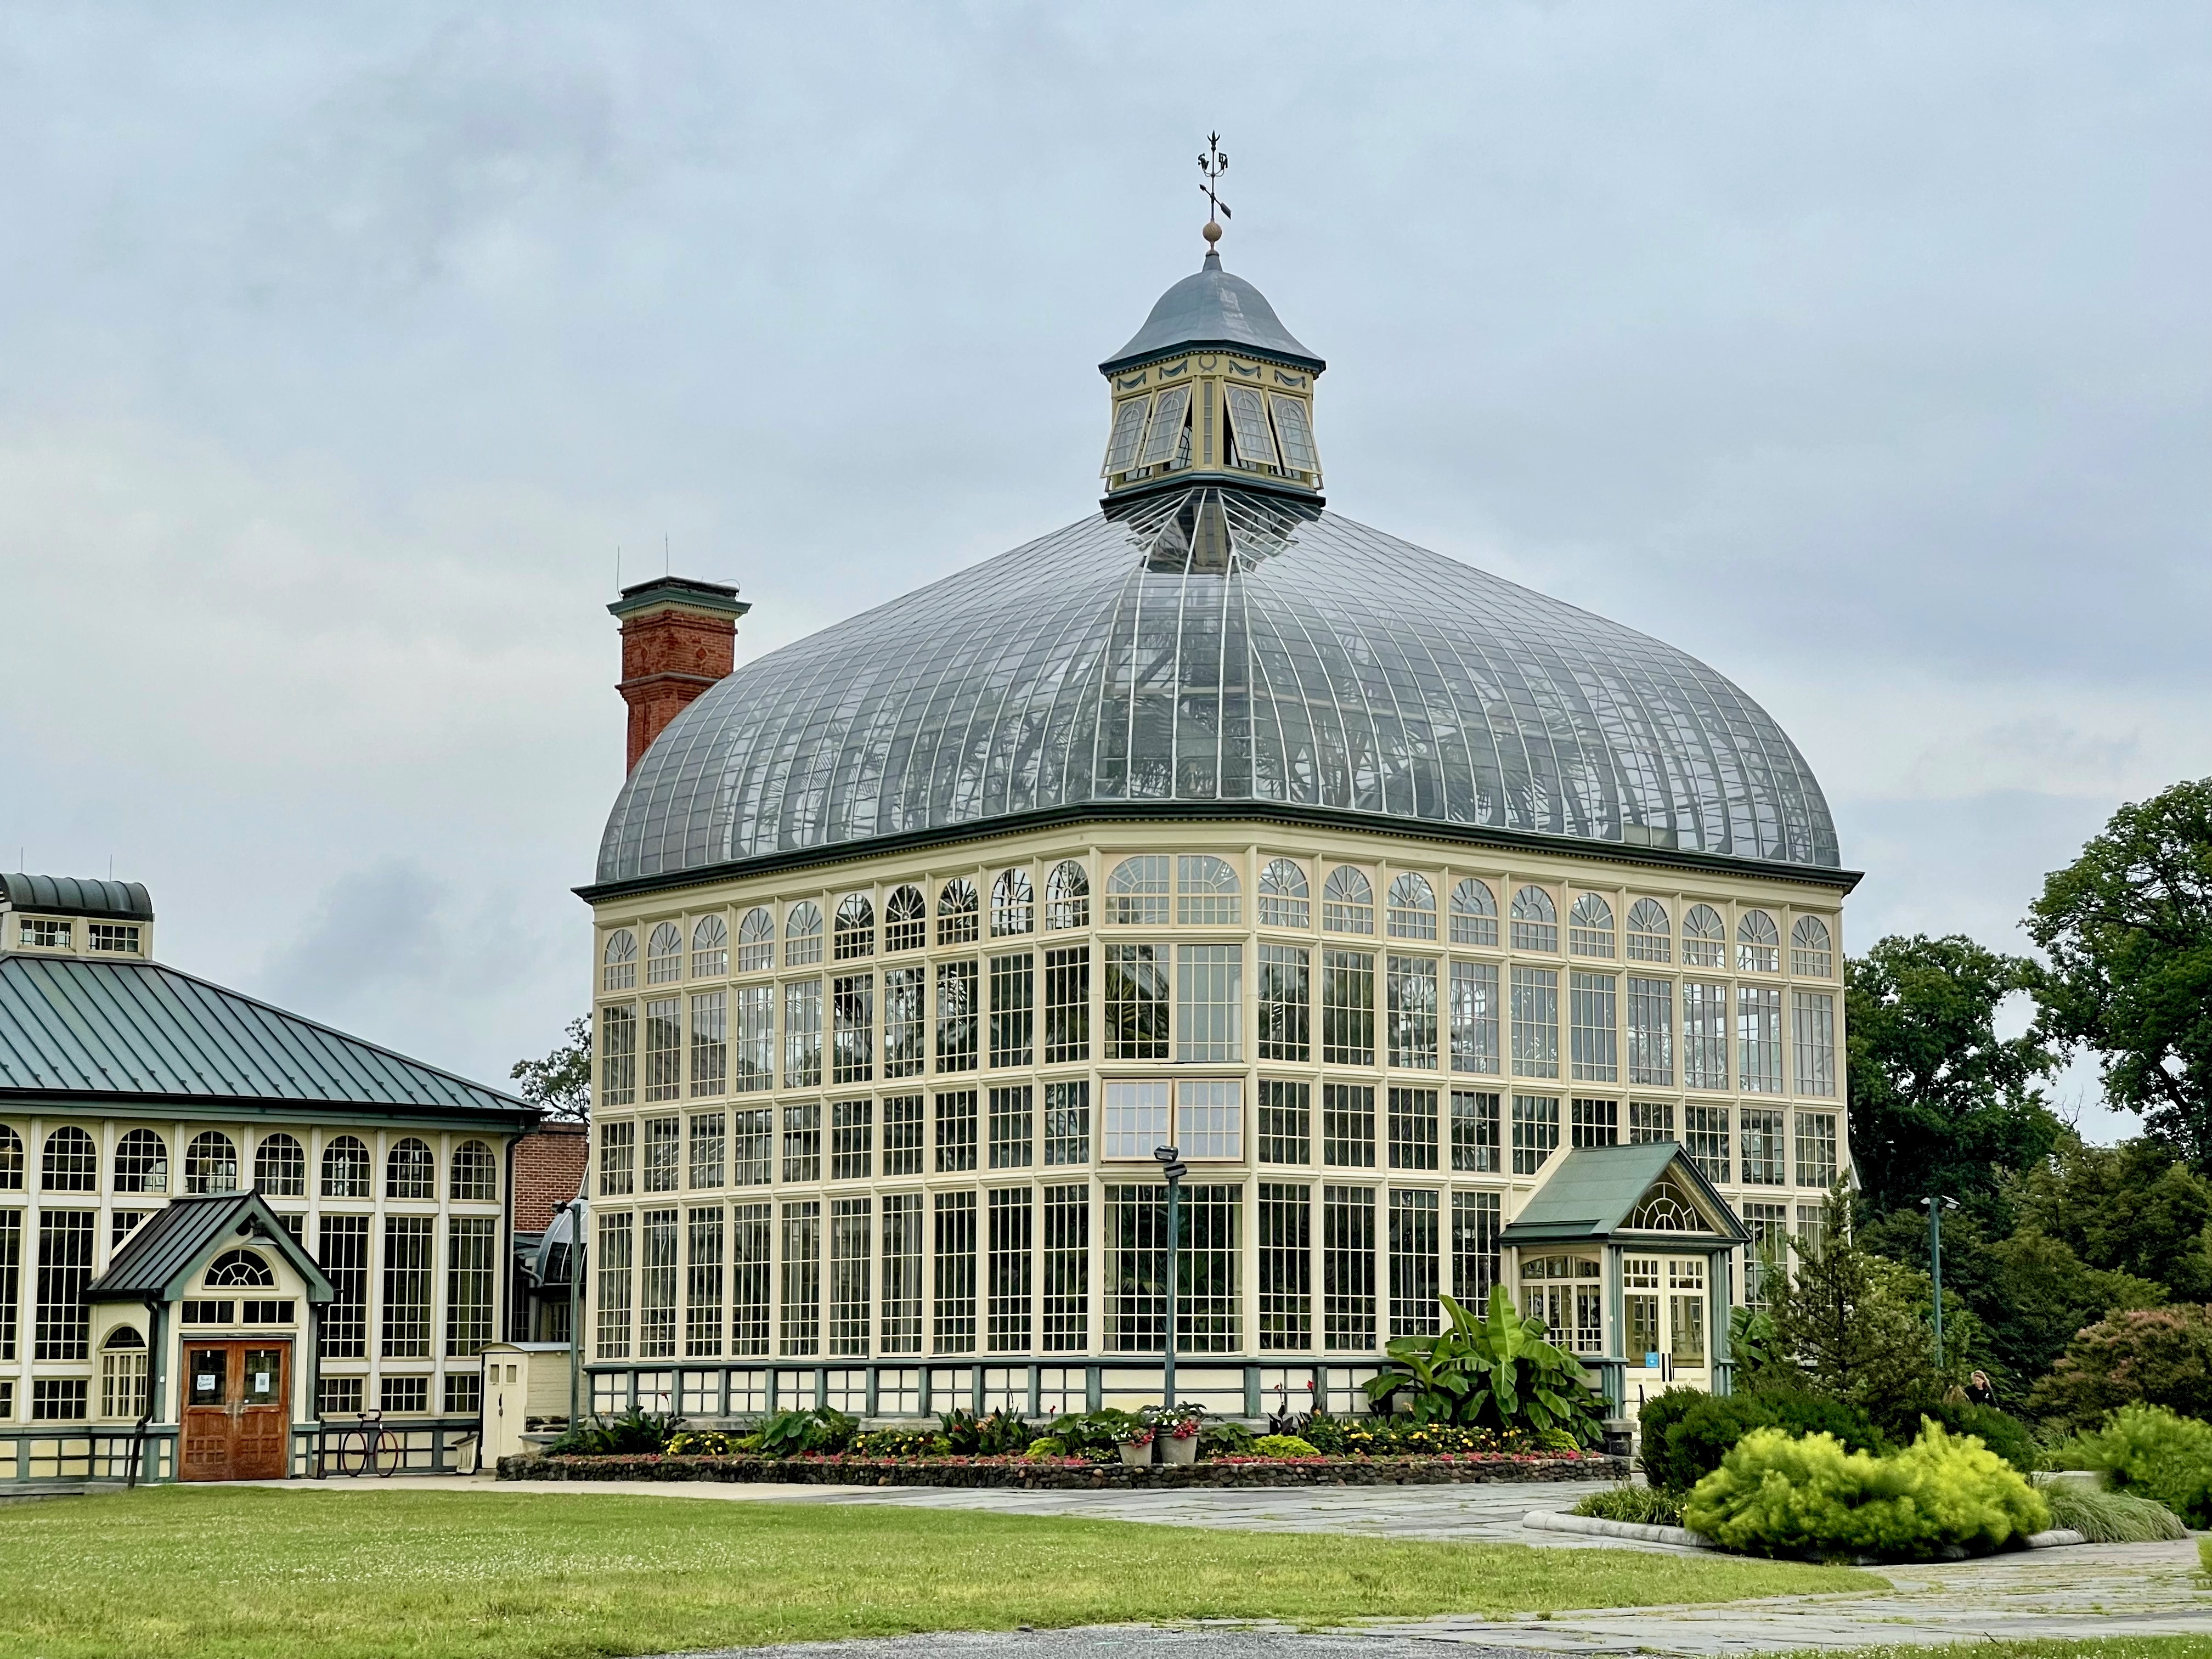 Rawlings Conservatory in Druid Hill Park